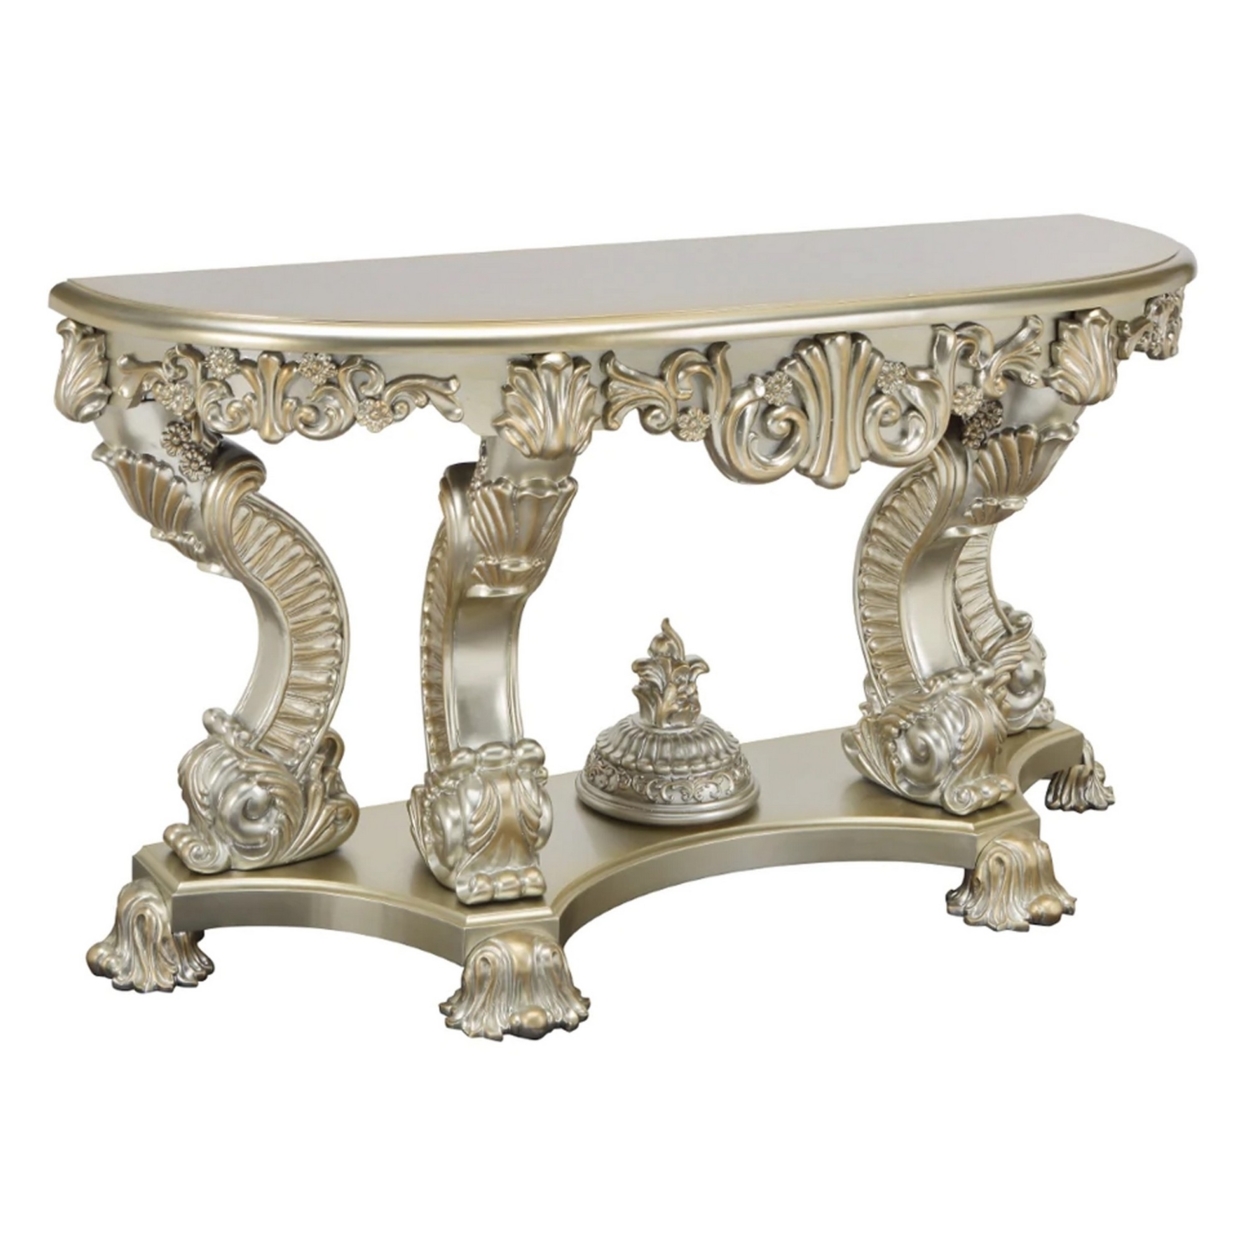 Esen 67 Inch Crescent Sofa Table Sideboard Console, Carvings, Antique Gold- Saltoro Sherpi